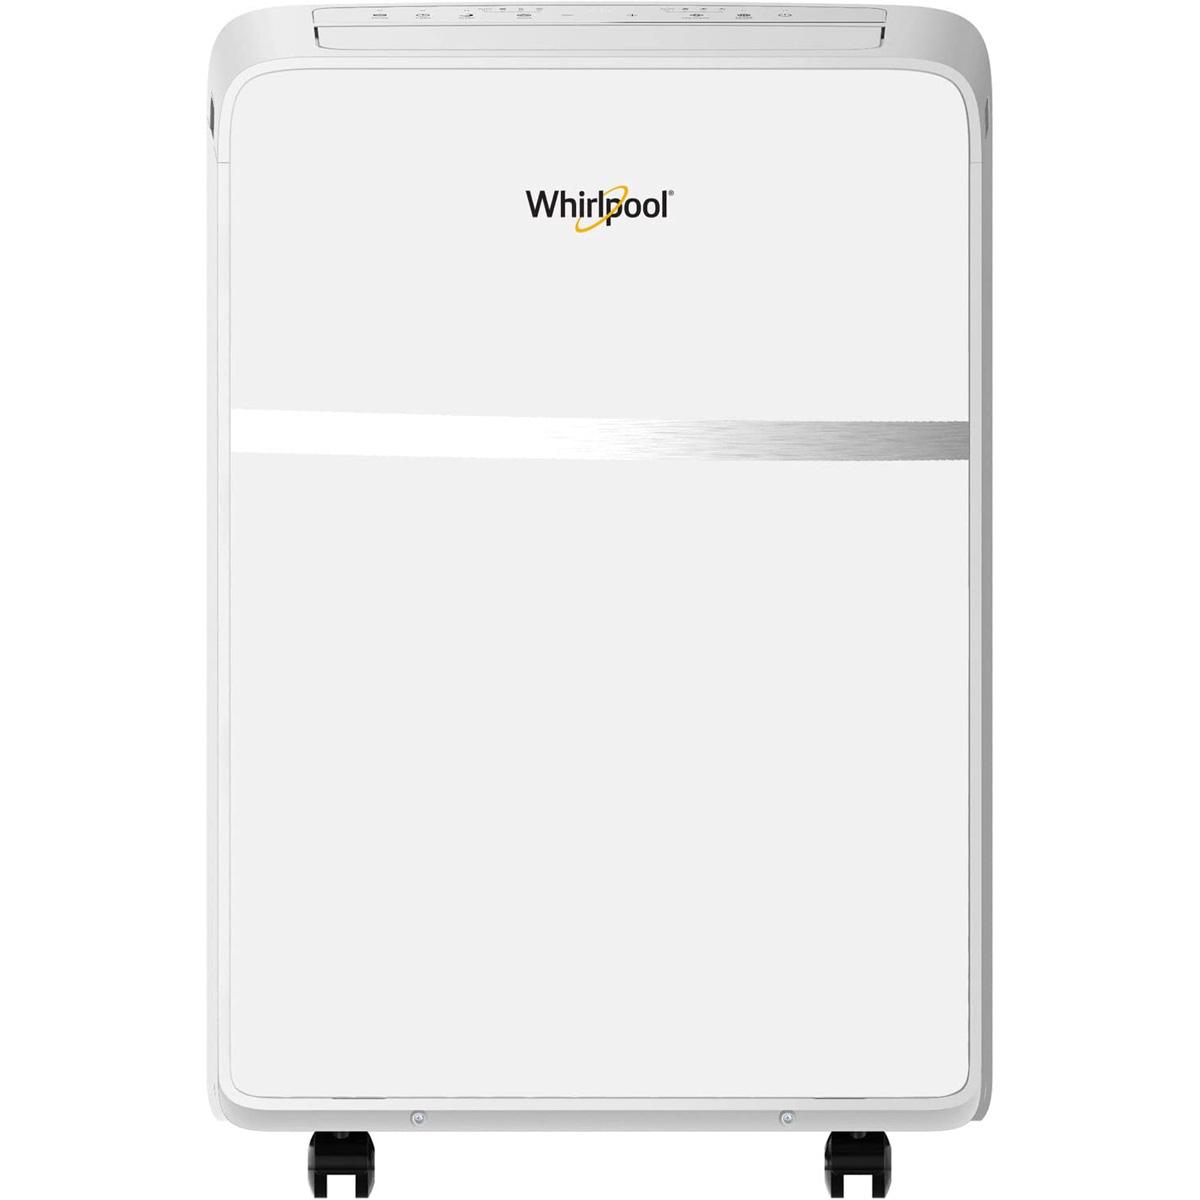 Whirpool 6500 BTU Portable Air Conditioner for $369.99 Shipped